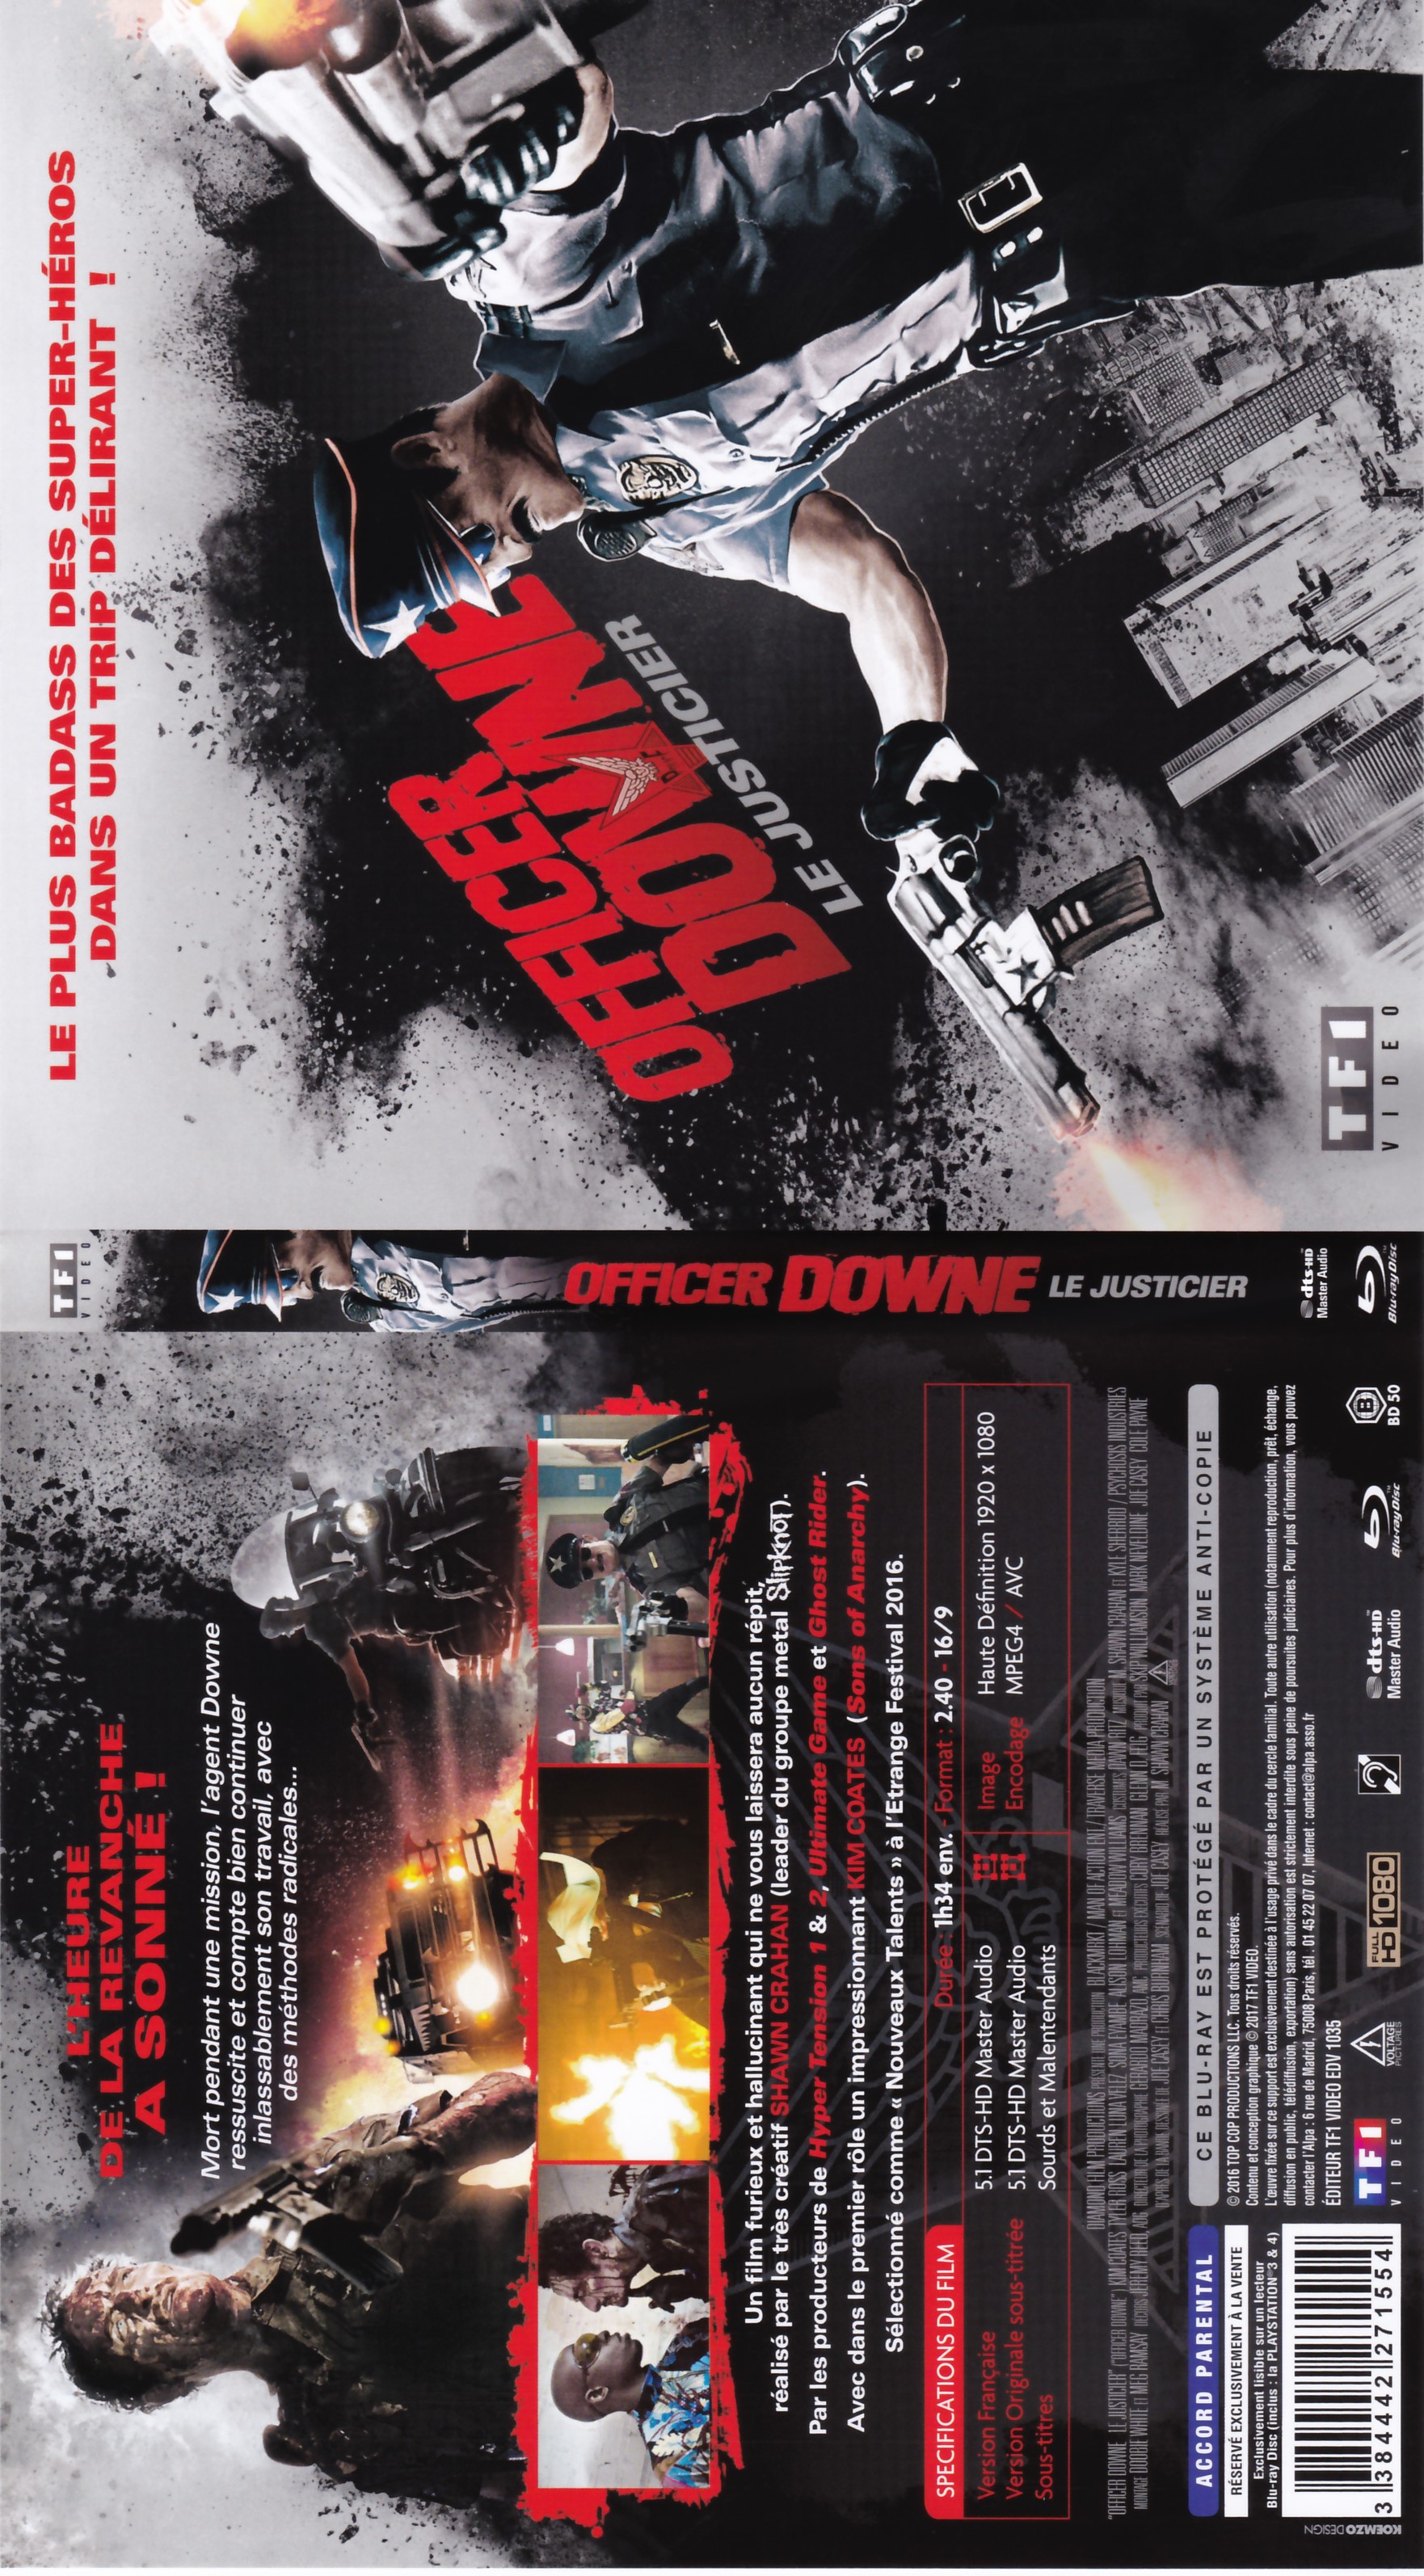 Jaquette DVD Officer Downe - Le Justicier (BLU-RAY)